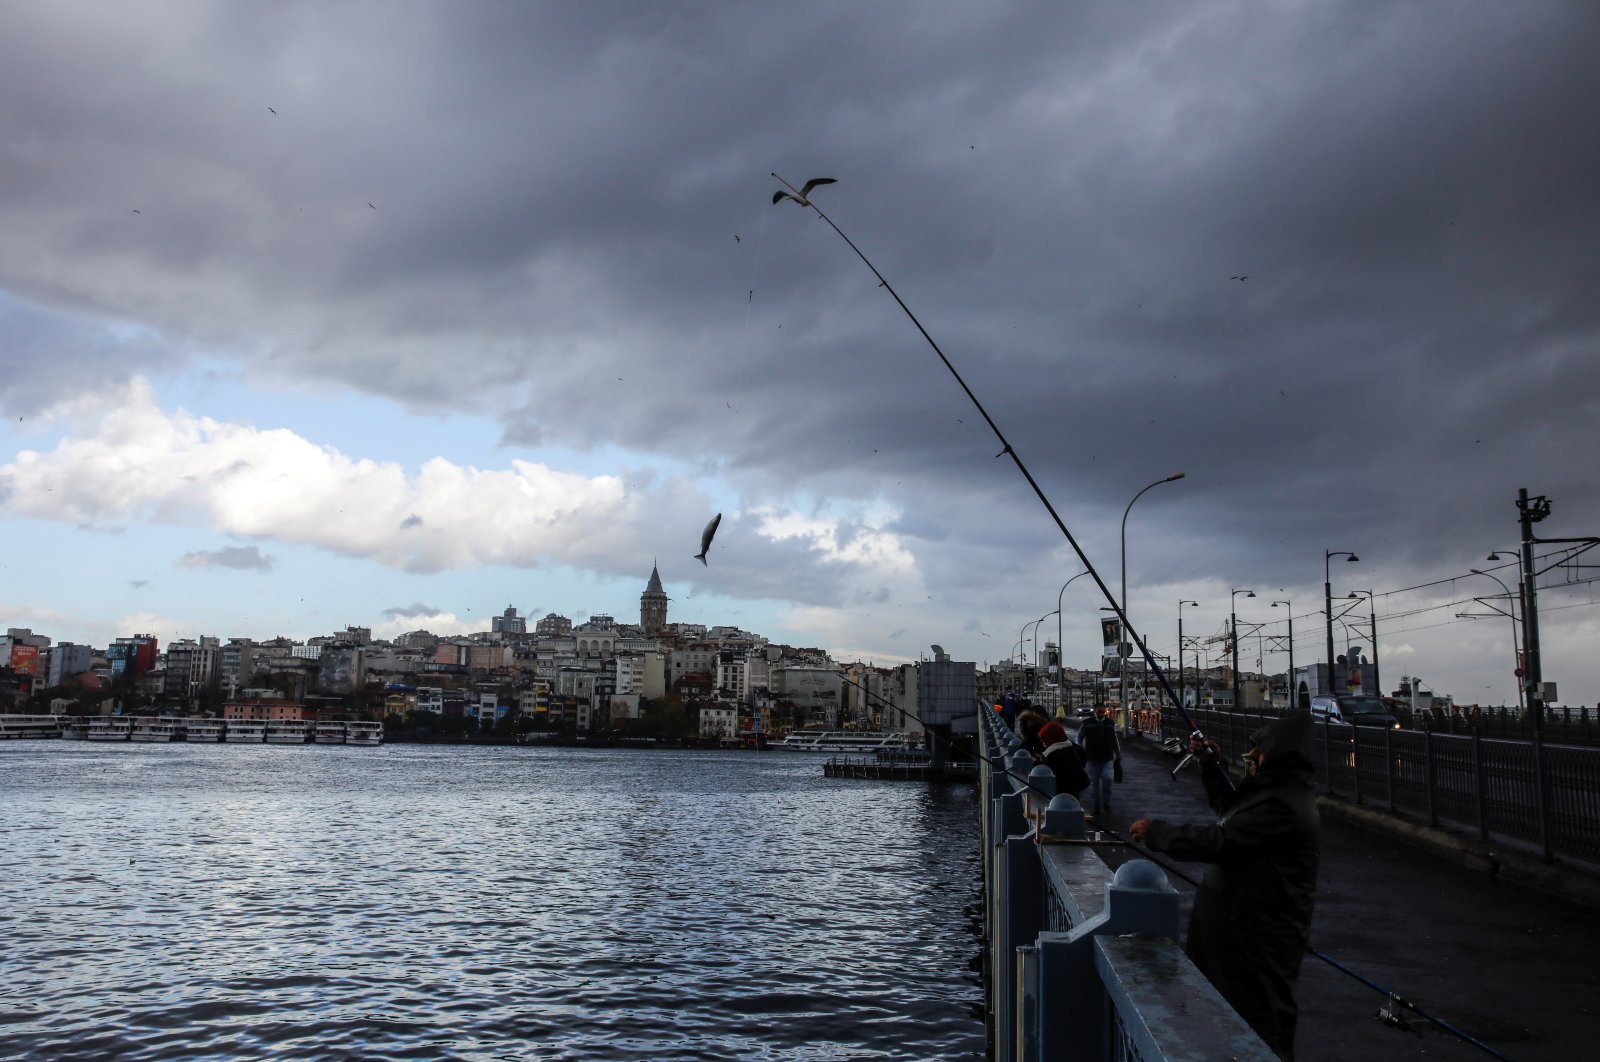 A man fishes from the Galata Bridge in Istanbul, Turkey, Nov. 30, 2021. (Reuters Photo)